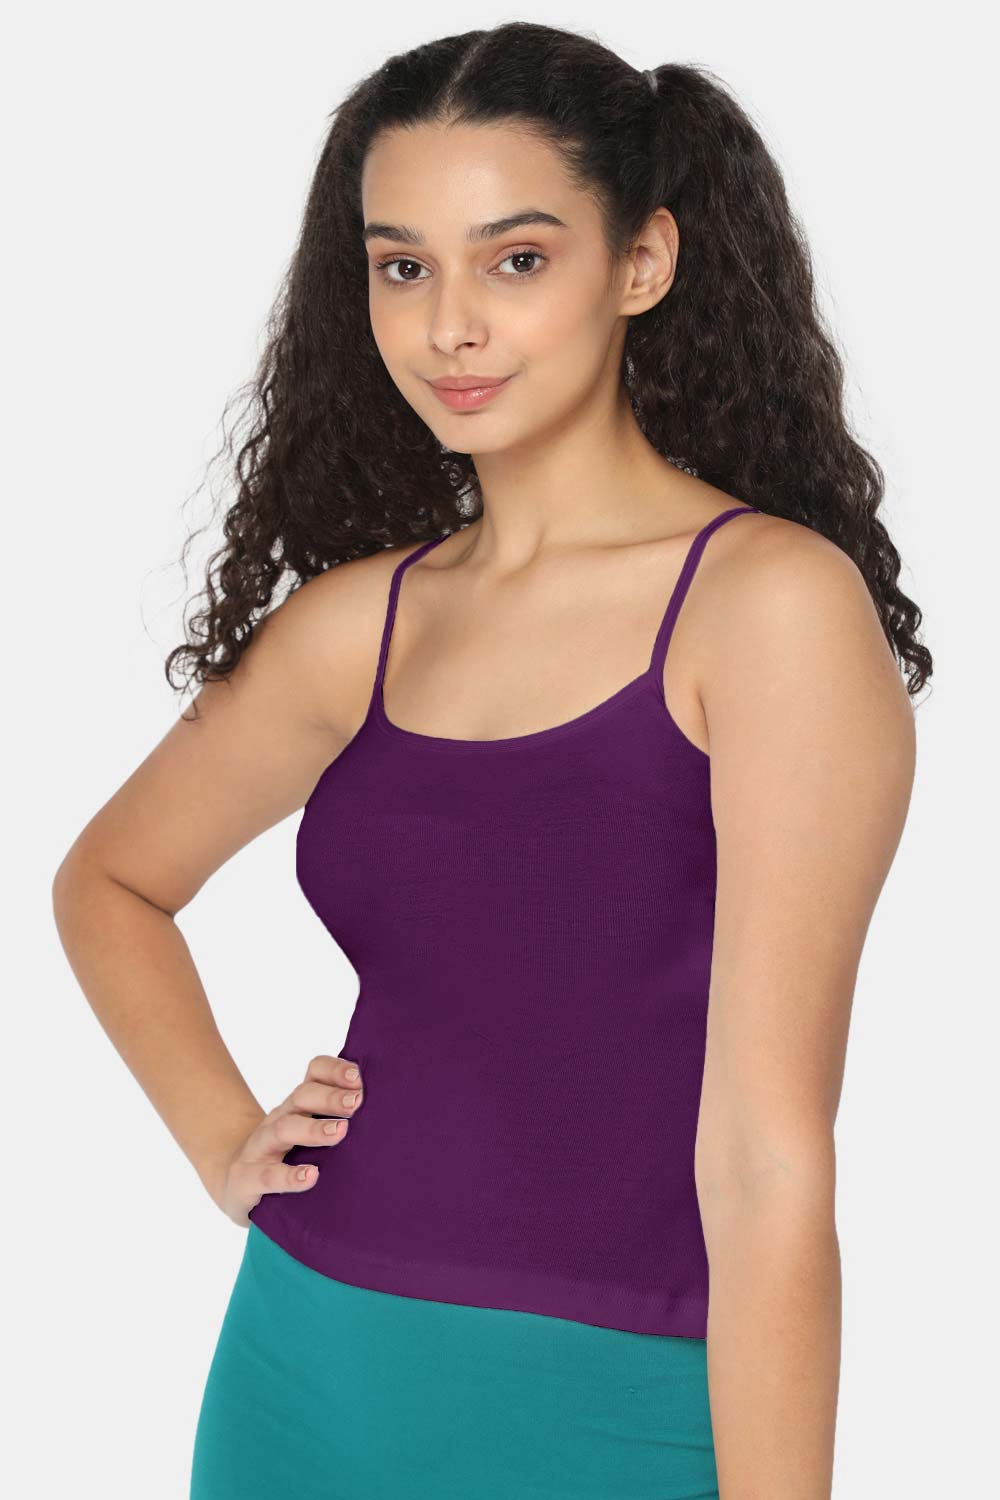 Intimacy Camisole-Slip Special Combo Pack - In02 - Pack of 3 - C42